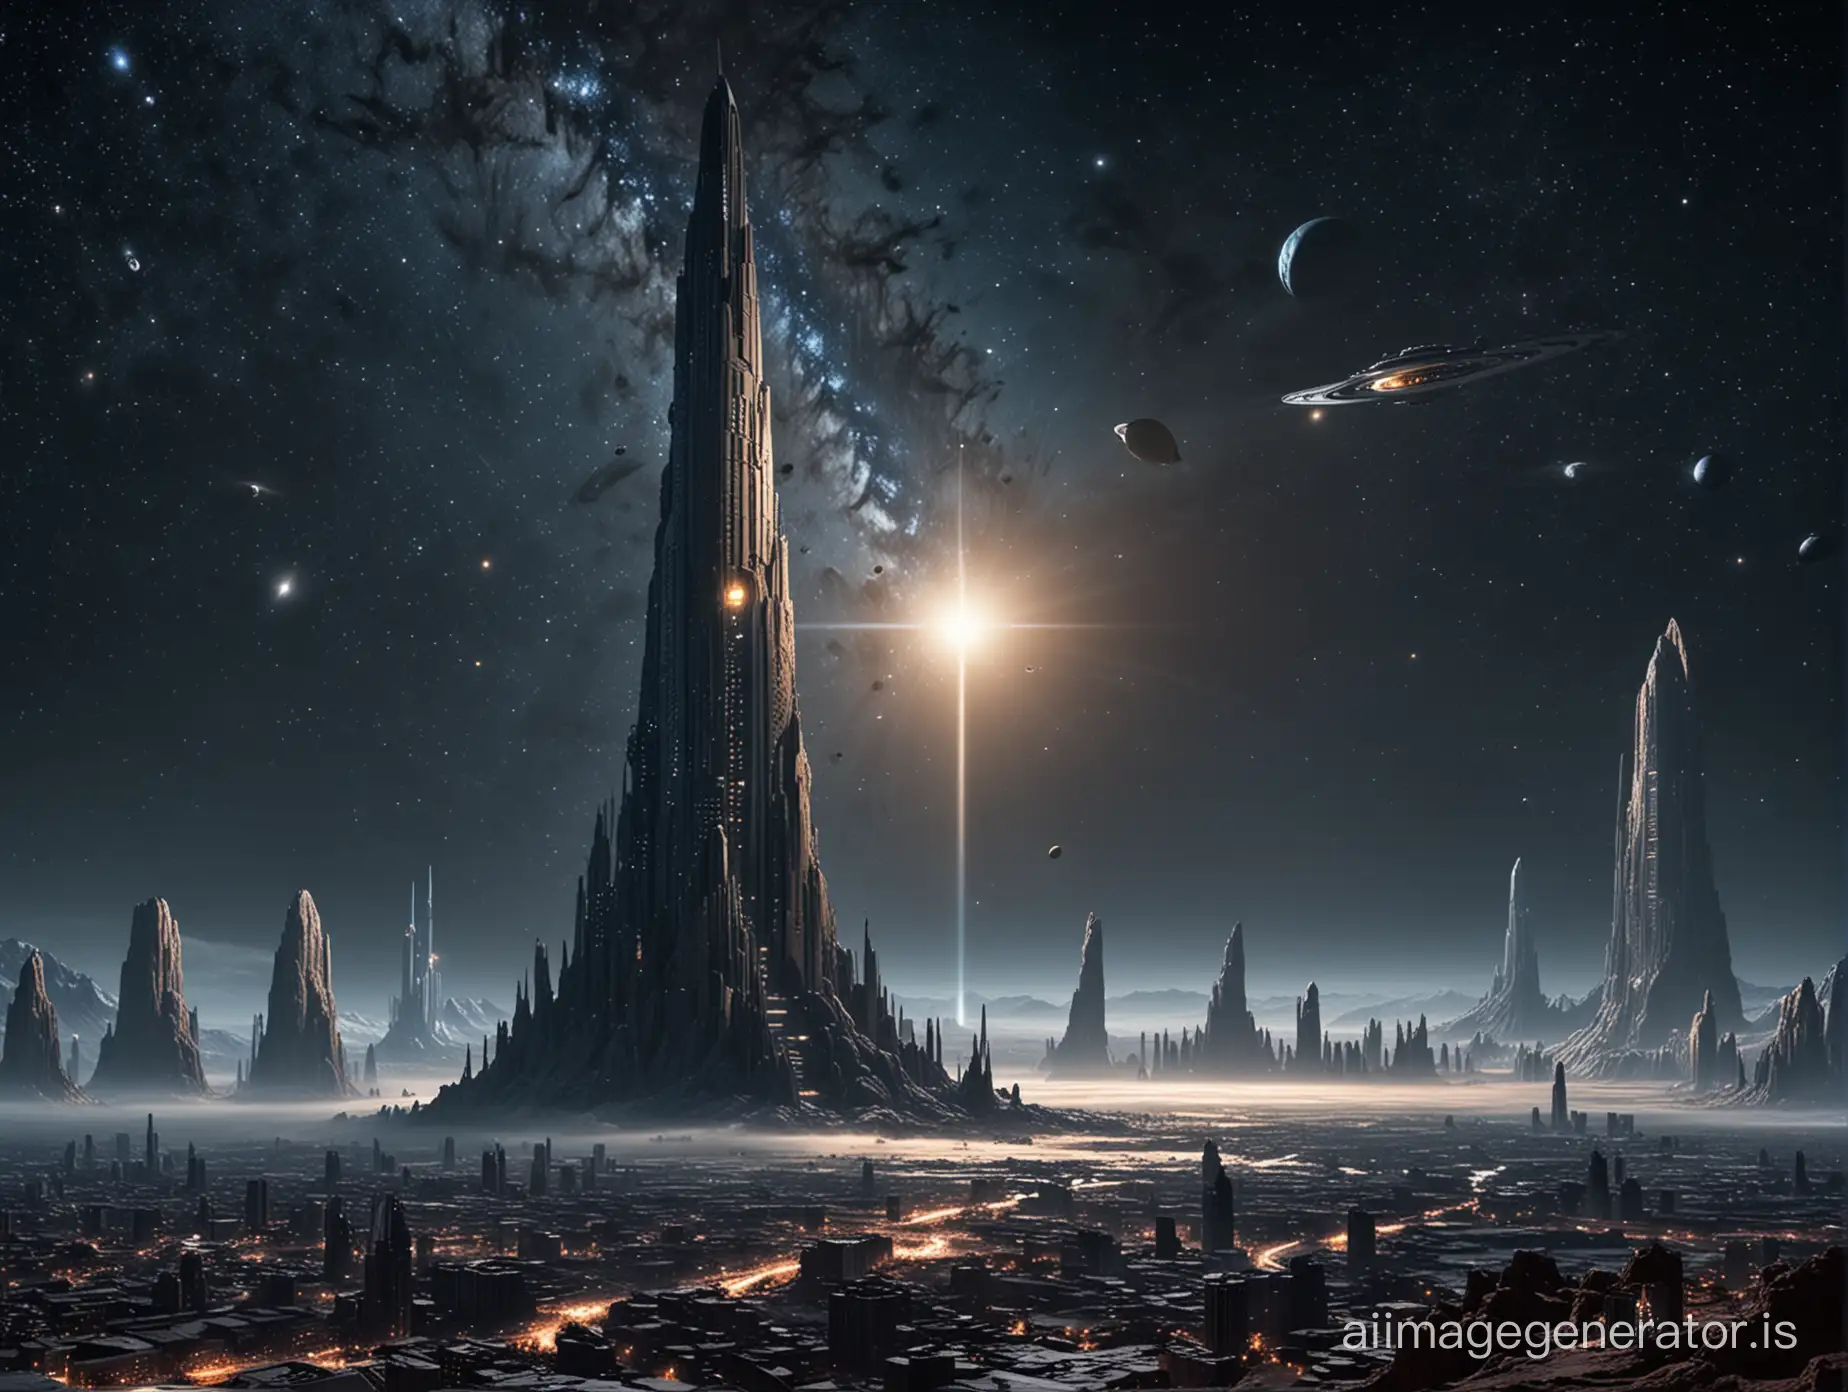 The biblical Tower of Babel and a futuristic city placed on Oumuamua in dark intergalactic space. The futuristic city shines with a thousand lights. One can see behind Saturn, Jupiter, and other stars.